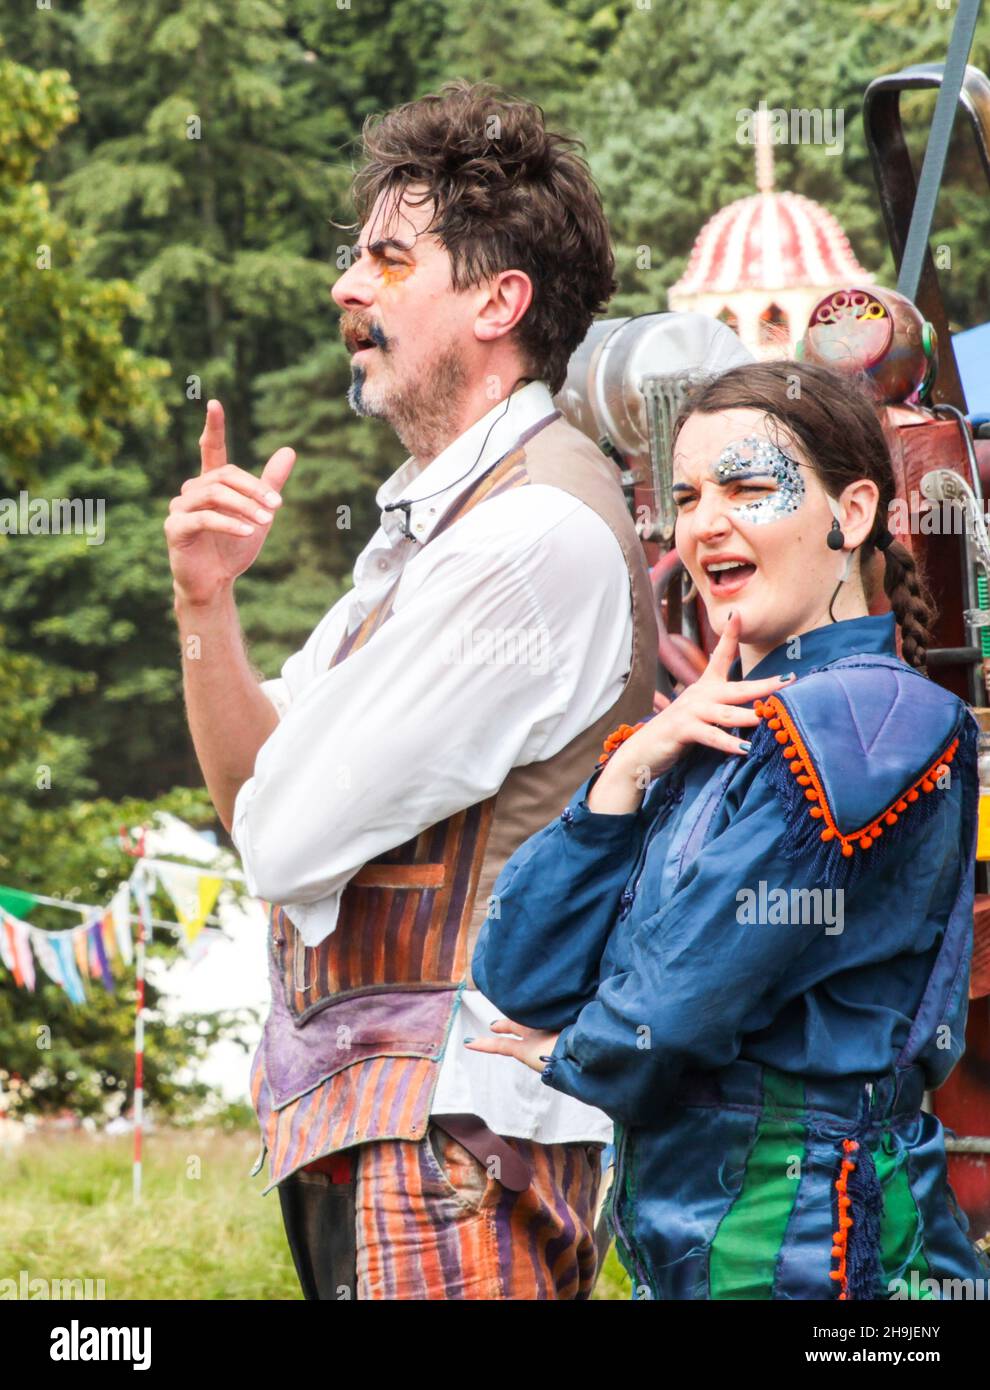 Philip Bosworth and Emily Essery of The Enfants Terribles theatre company performing The Fantastical Flying Exploratory Laboratory at the 2016 Latitude Festival Stock Photo